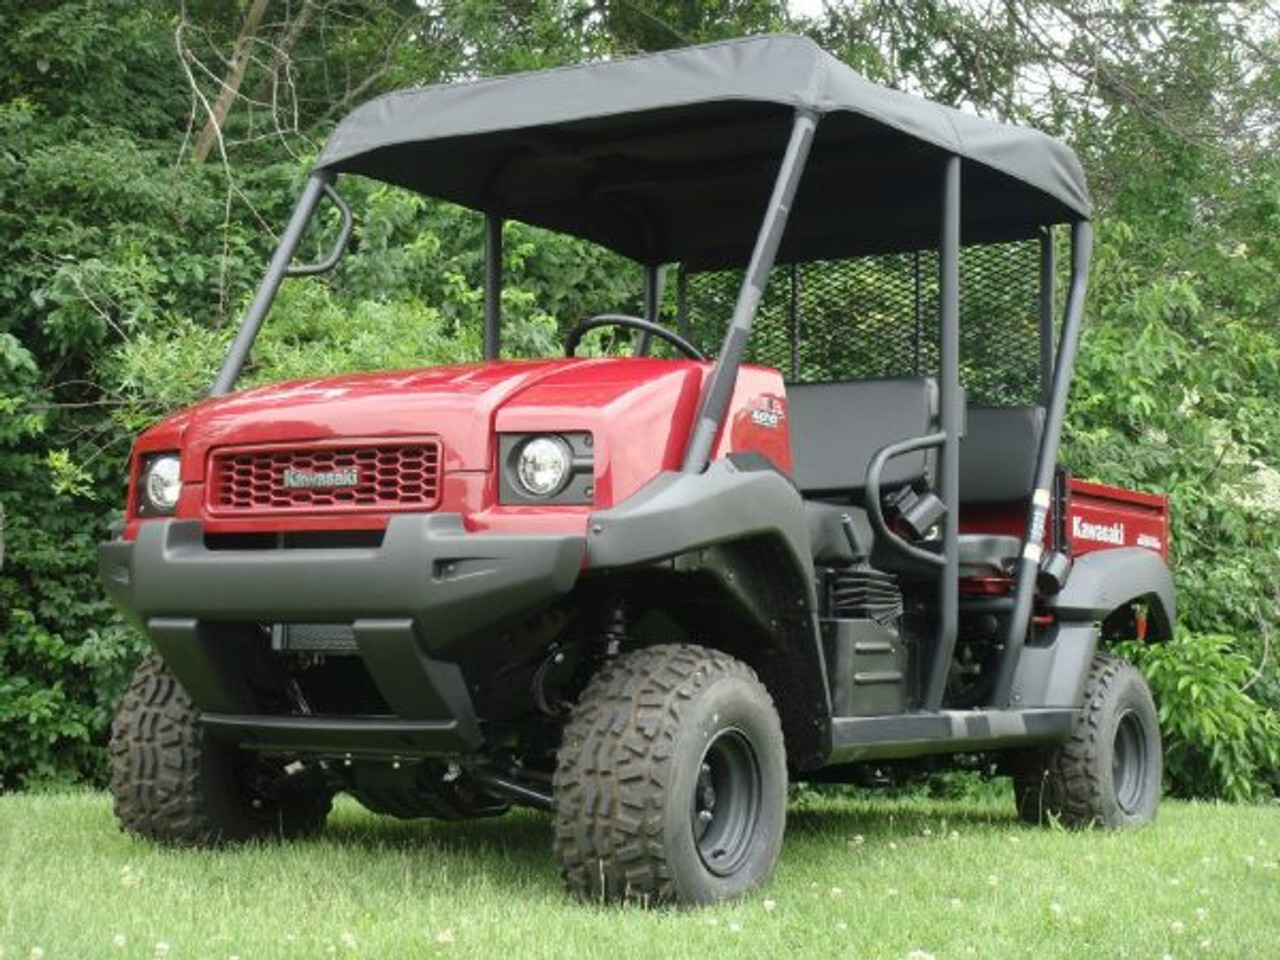 3 Star side x side Kawasaki Mule 4000/4010 trans soft top front and side angle view